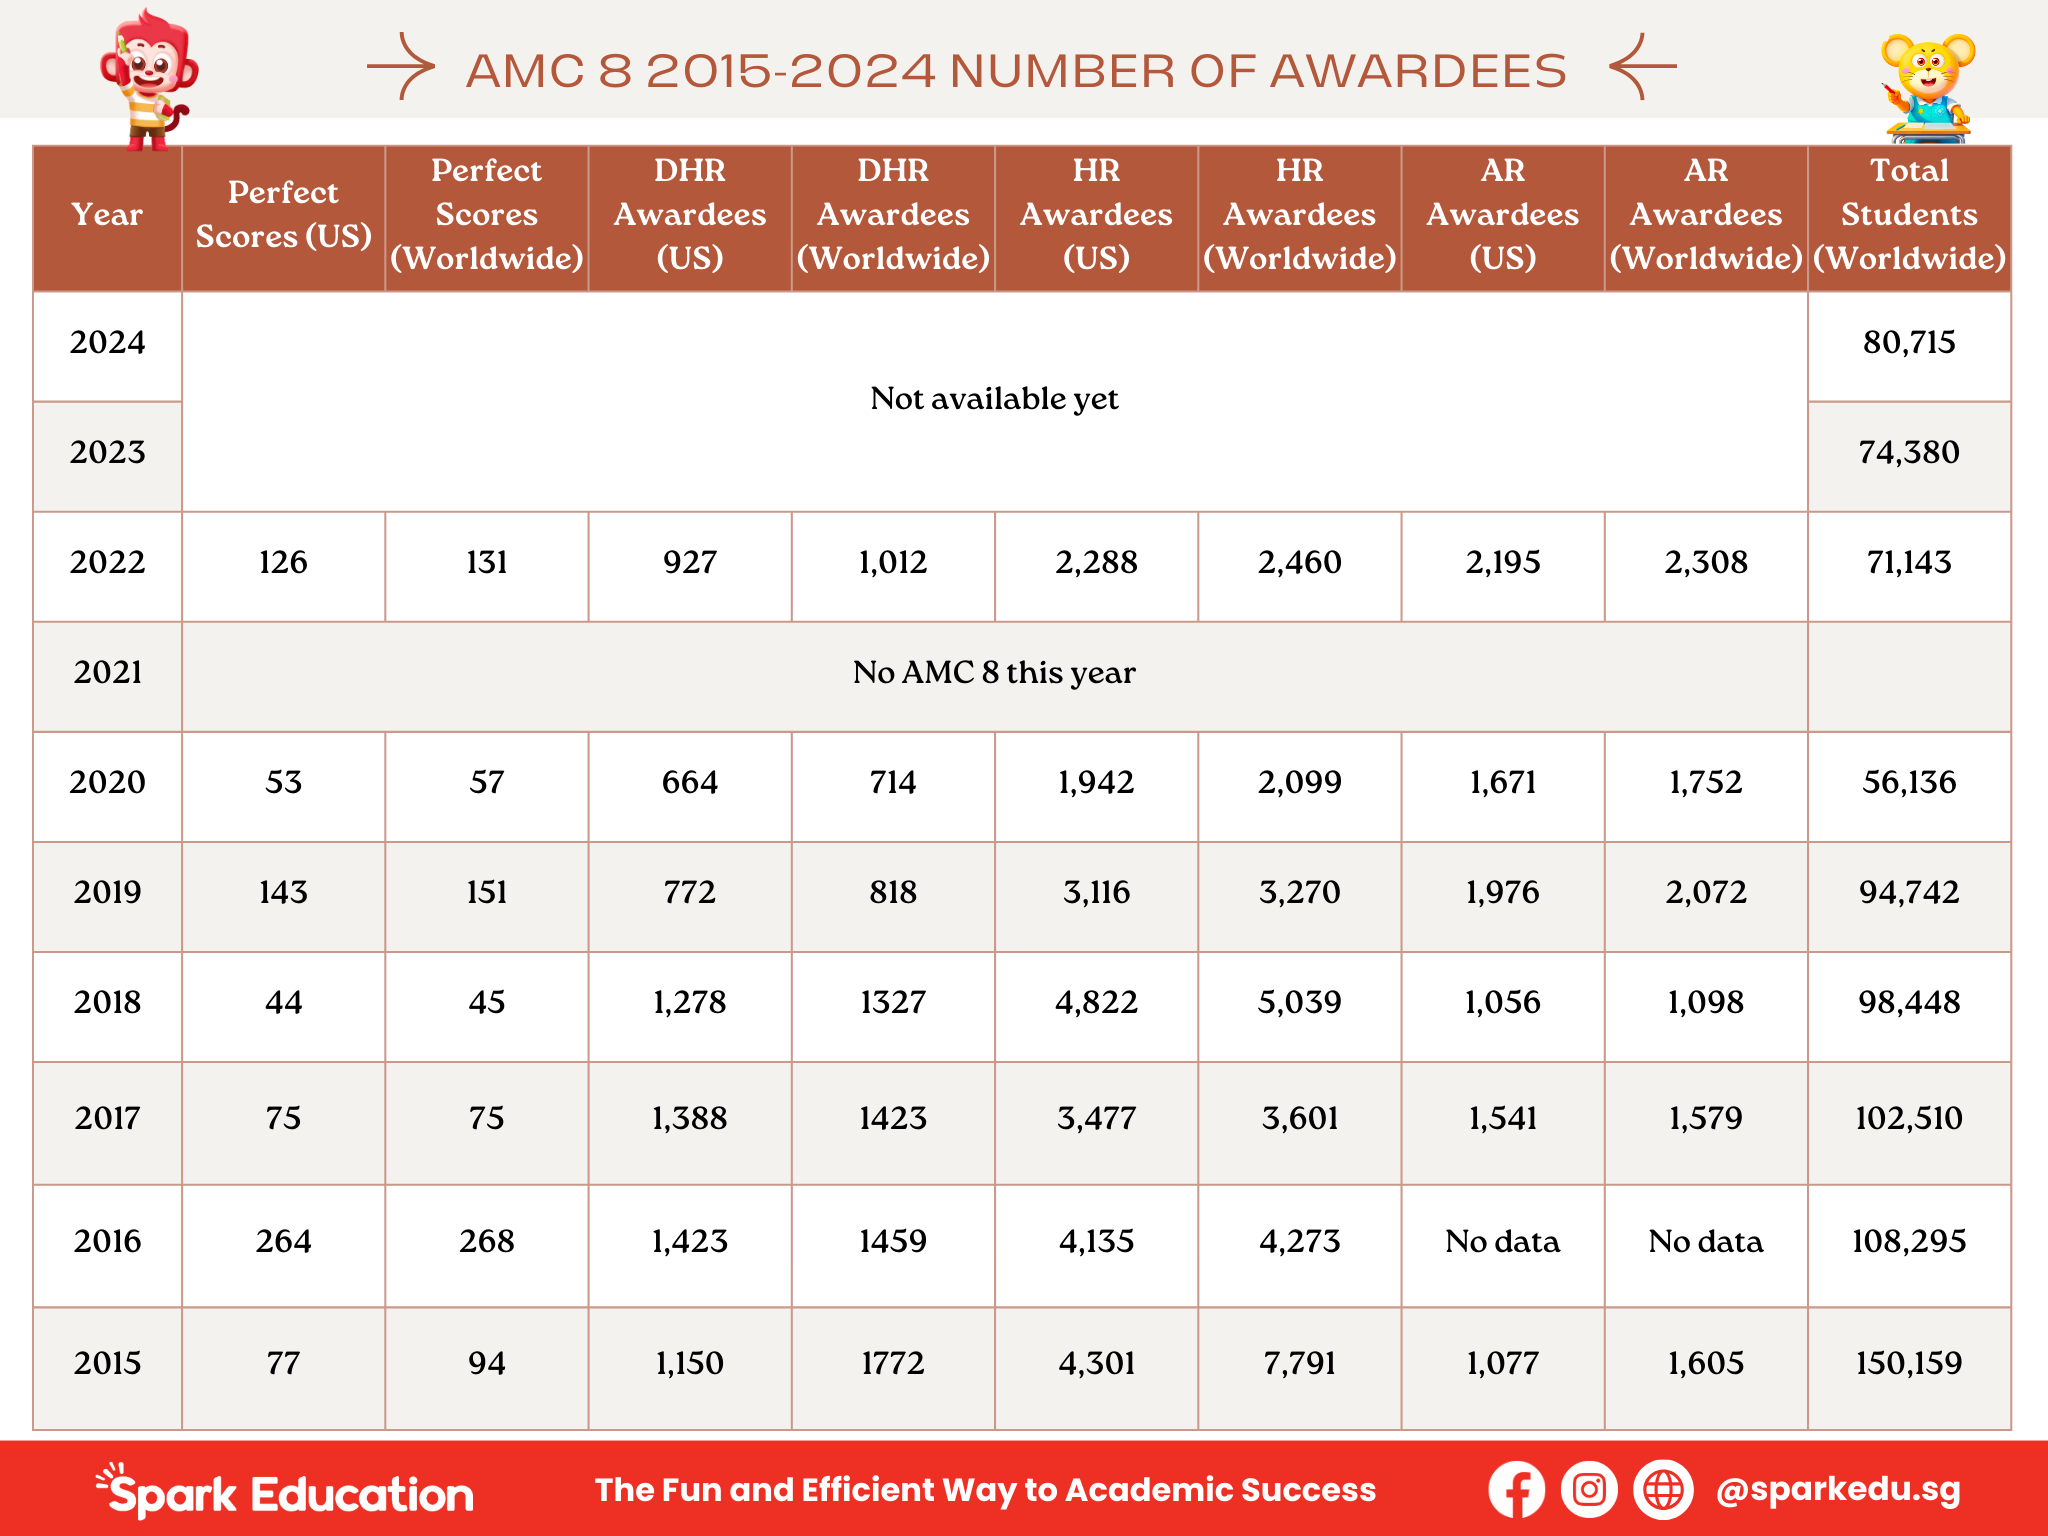 AMC 8 2015-2024 Number of Awardees